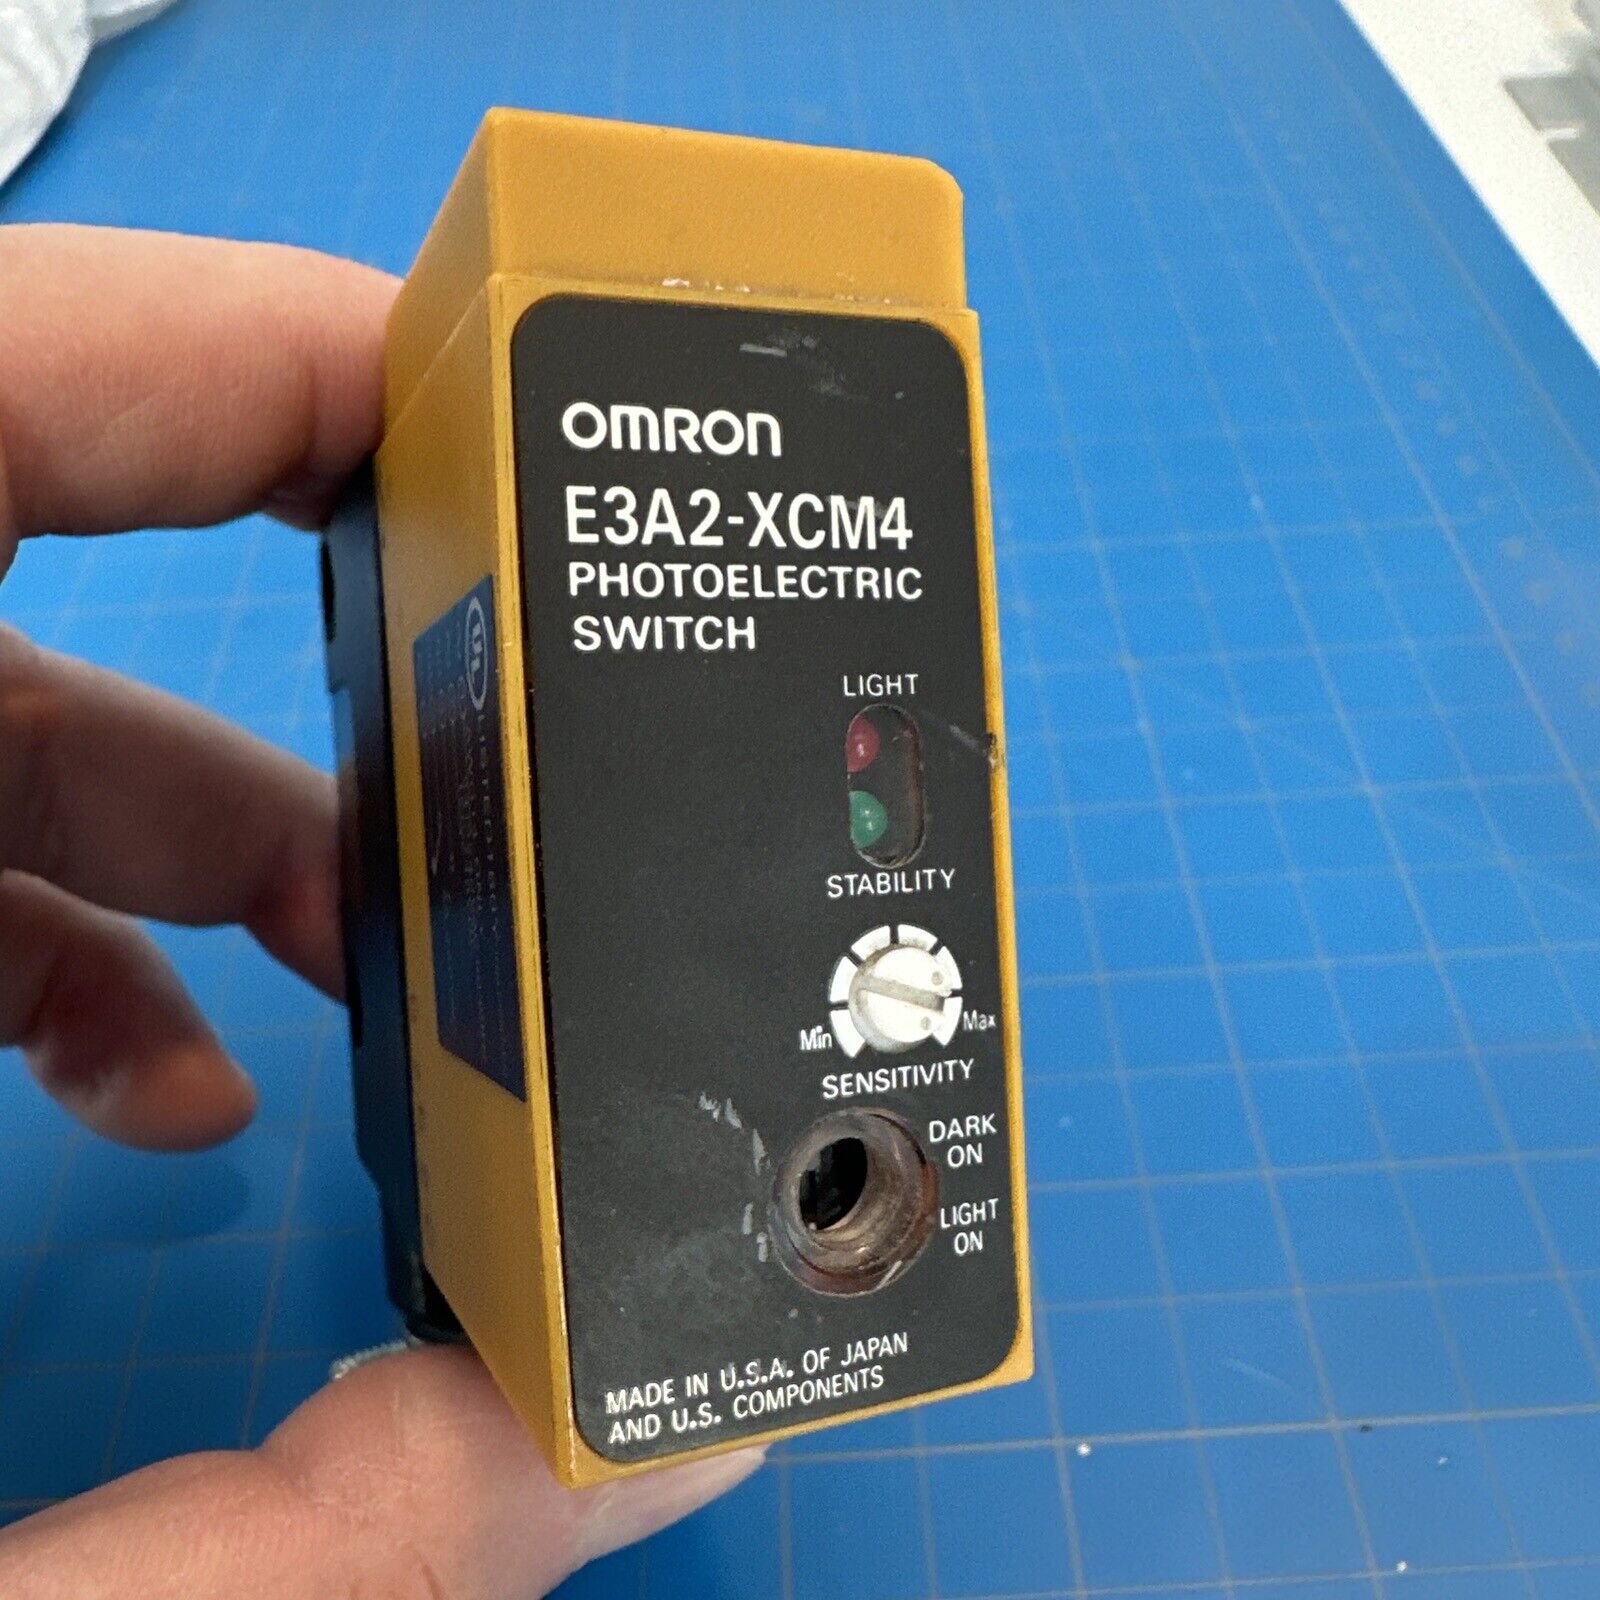 Omron Photoelectric Switch E3A2-XCM4